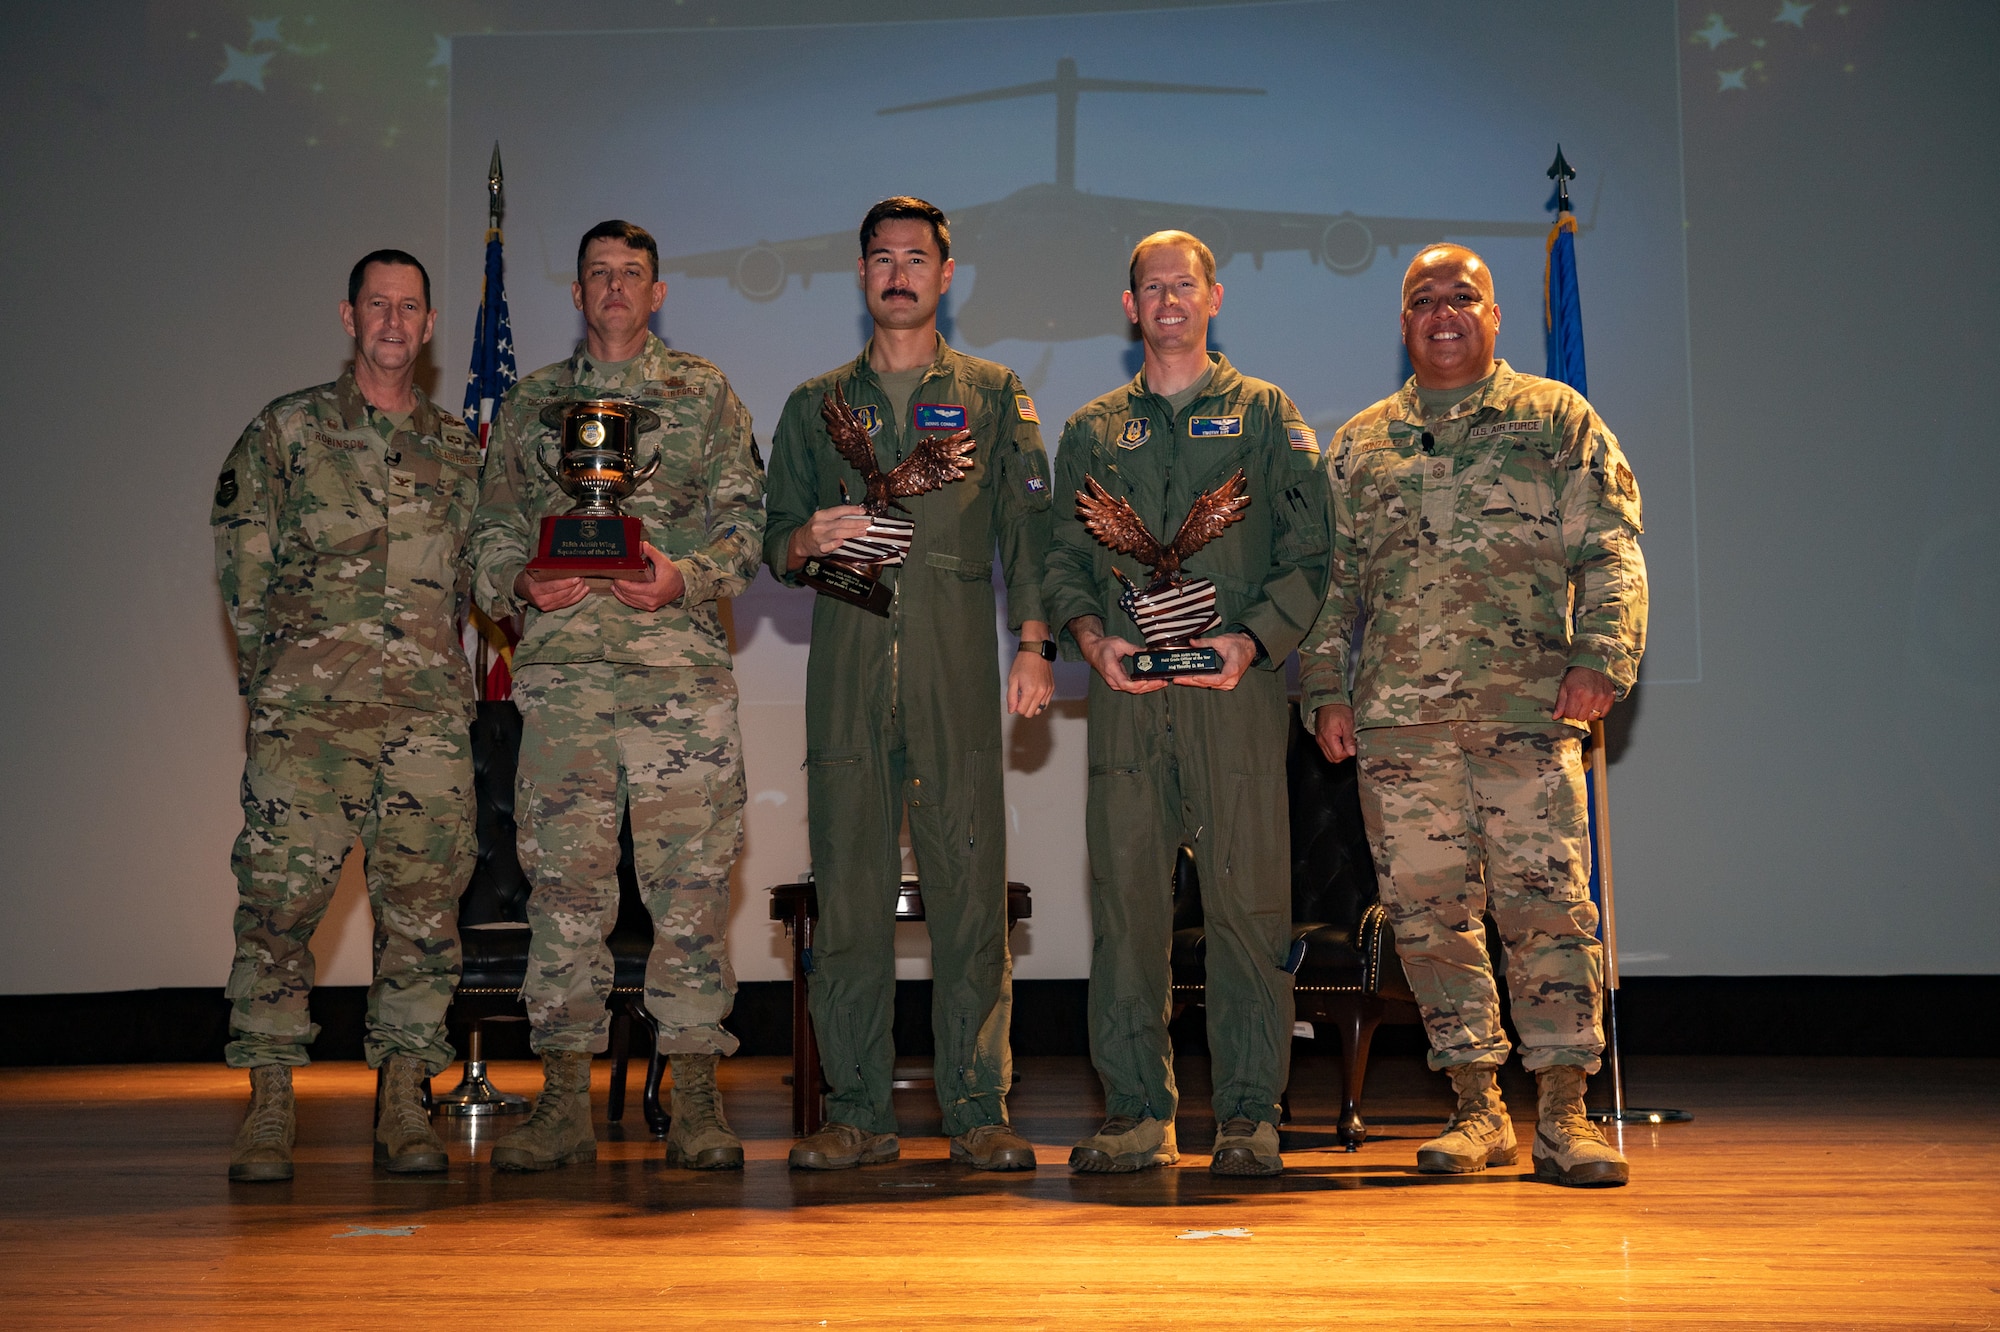 The 315th Airlift Wing hosted its annual awards ceremony to highlight the accomplishments of the wing and its members, March 18, 2023, at Joint Base Charleston, South Carolina. Col. John Robinson, 315 AW commander, and Chief Master Sgt. Joe Gonzalez, 315 AW command chief, hosted the ceremony to recognize and award exceptional Airmen for their 2022 performance and celebrate the 315 AW’s achievement of receiving the distinguished Raincross Trophy from the Fourth Air Force, headquartered at March Air Reserve Base, California.